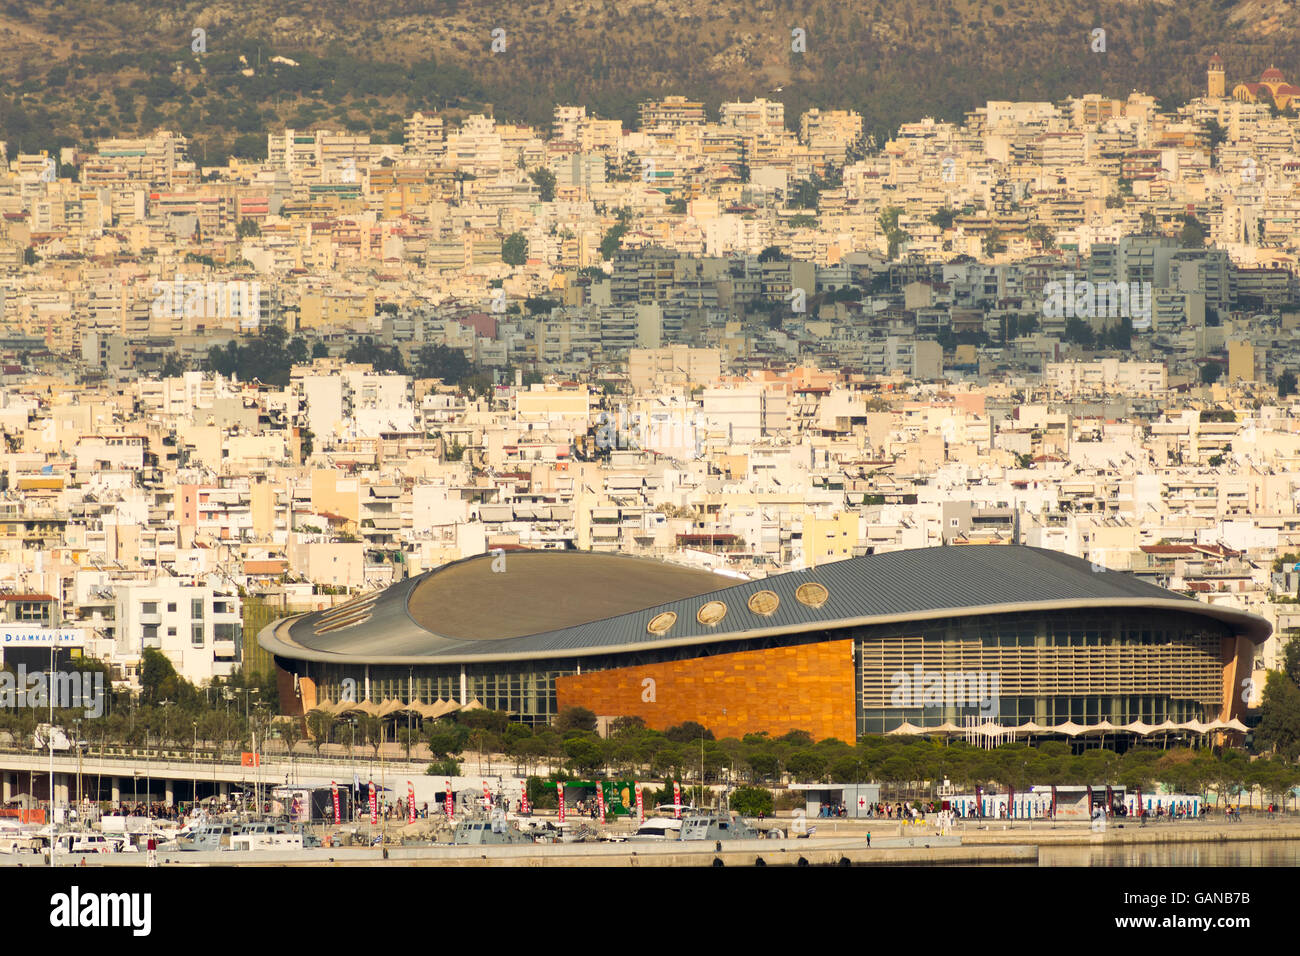 Athens, Greece 7 Jume 2016. Tae kwon do stadium in Greece Piraeus. Landscape view of the city with the stadium as foreground. Stock Photo